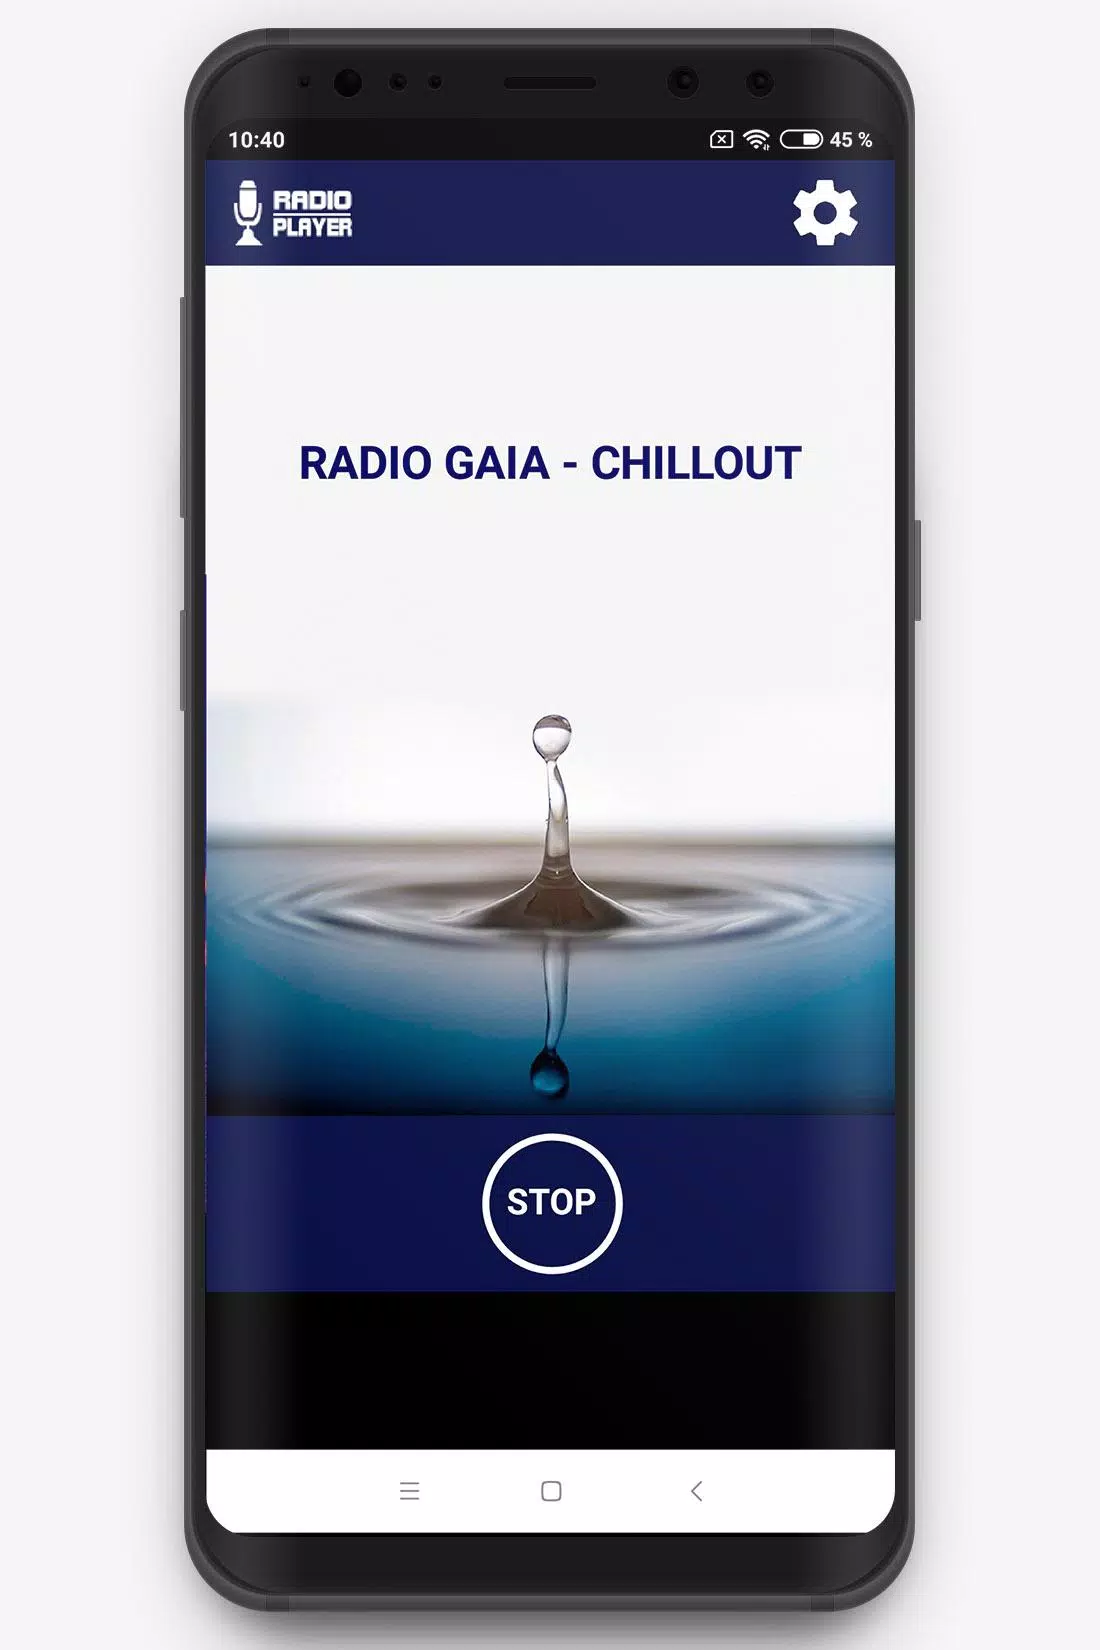 Chillout Radio Gaia Live Station APK for Android Download